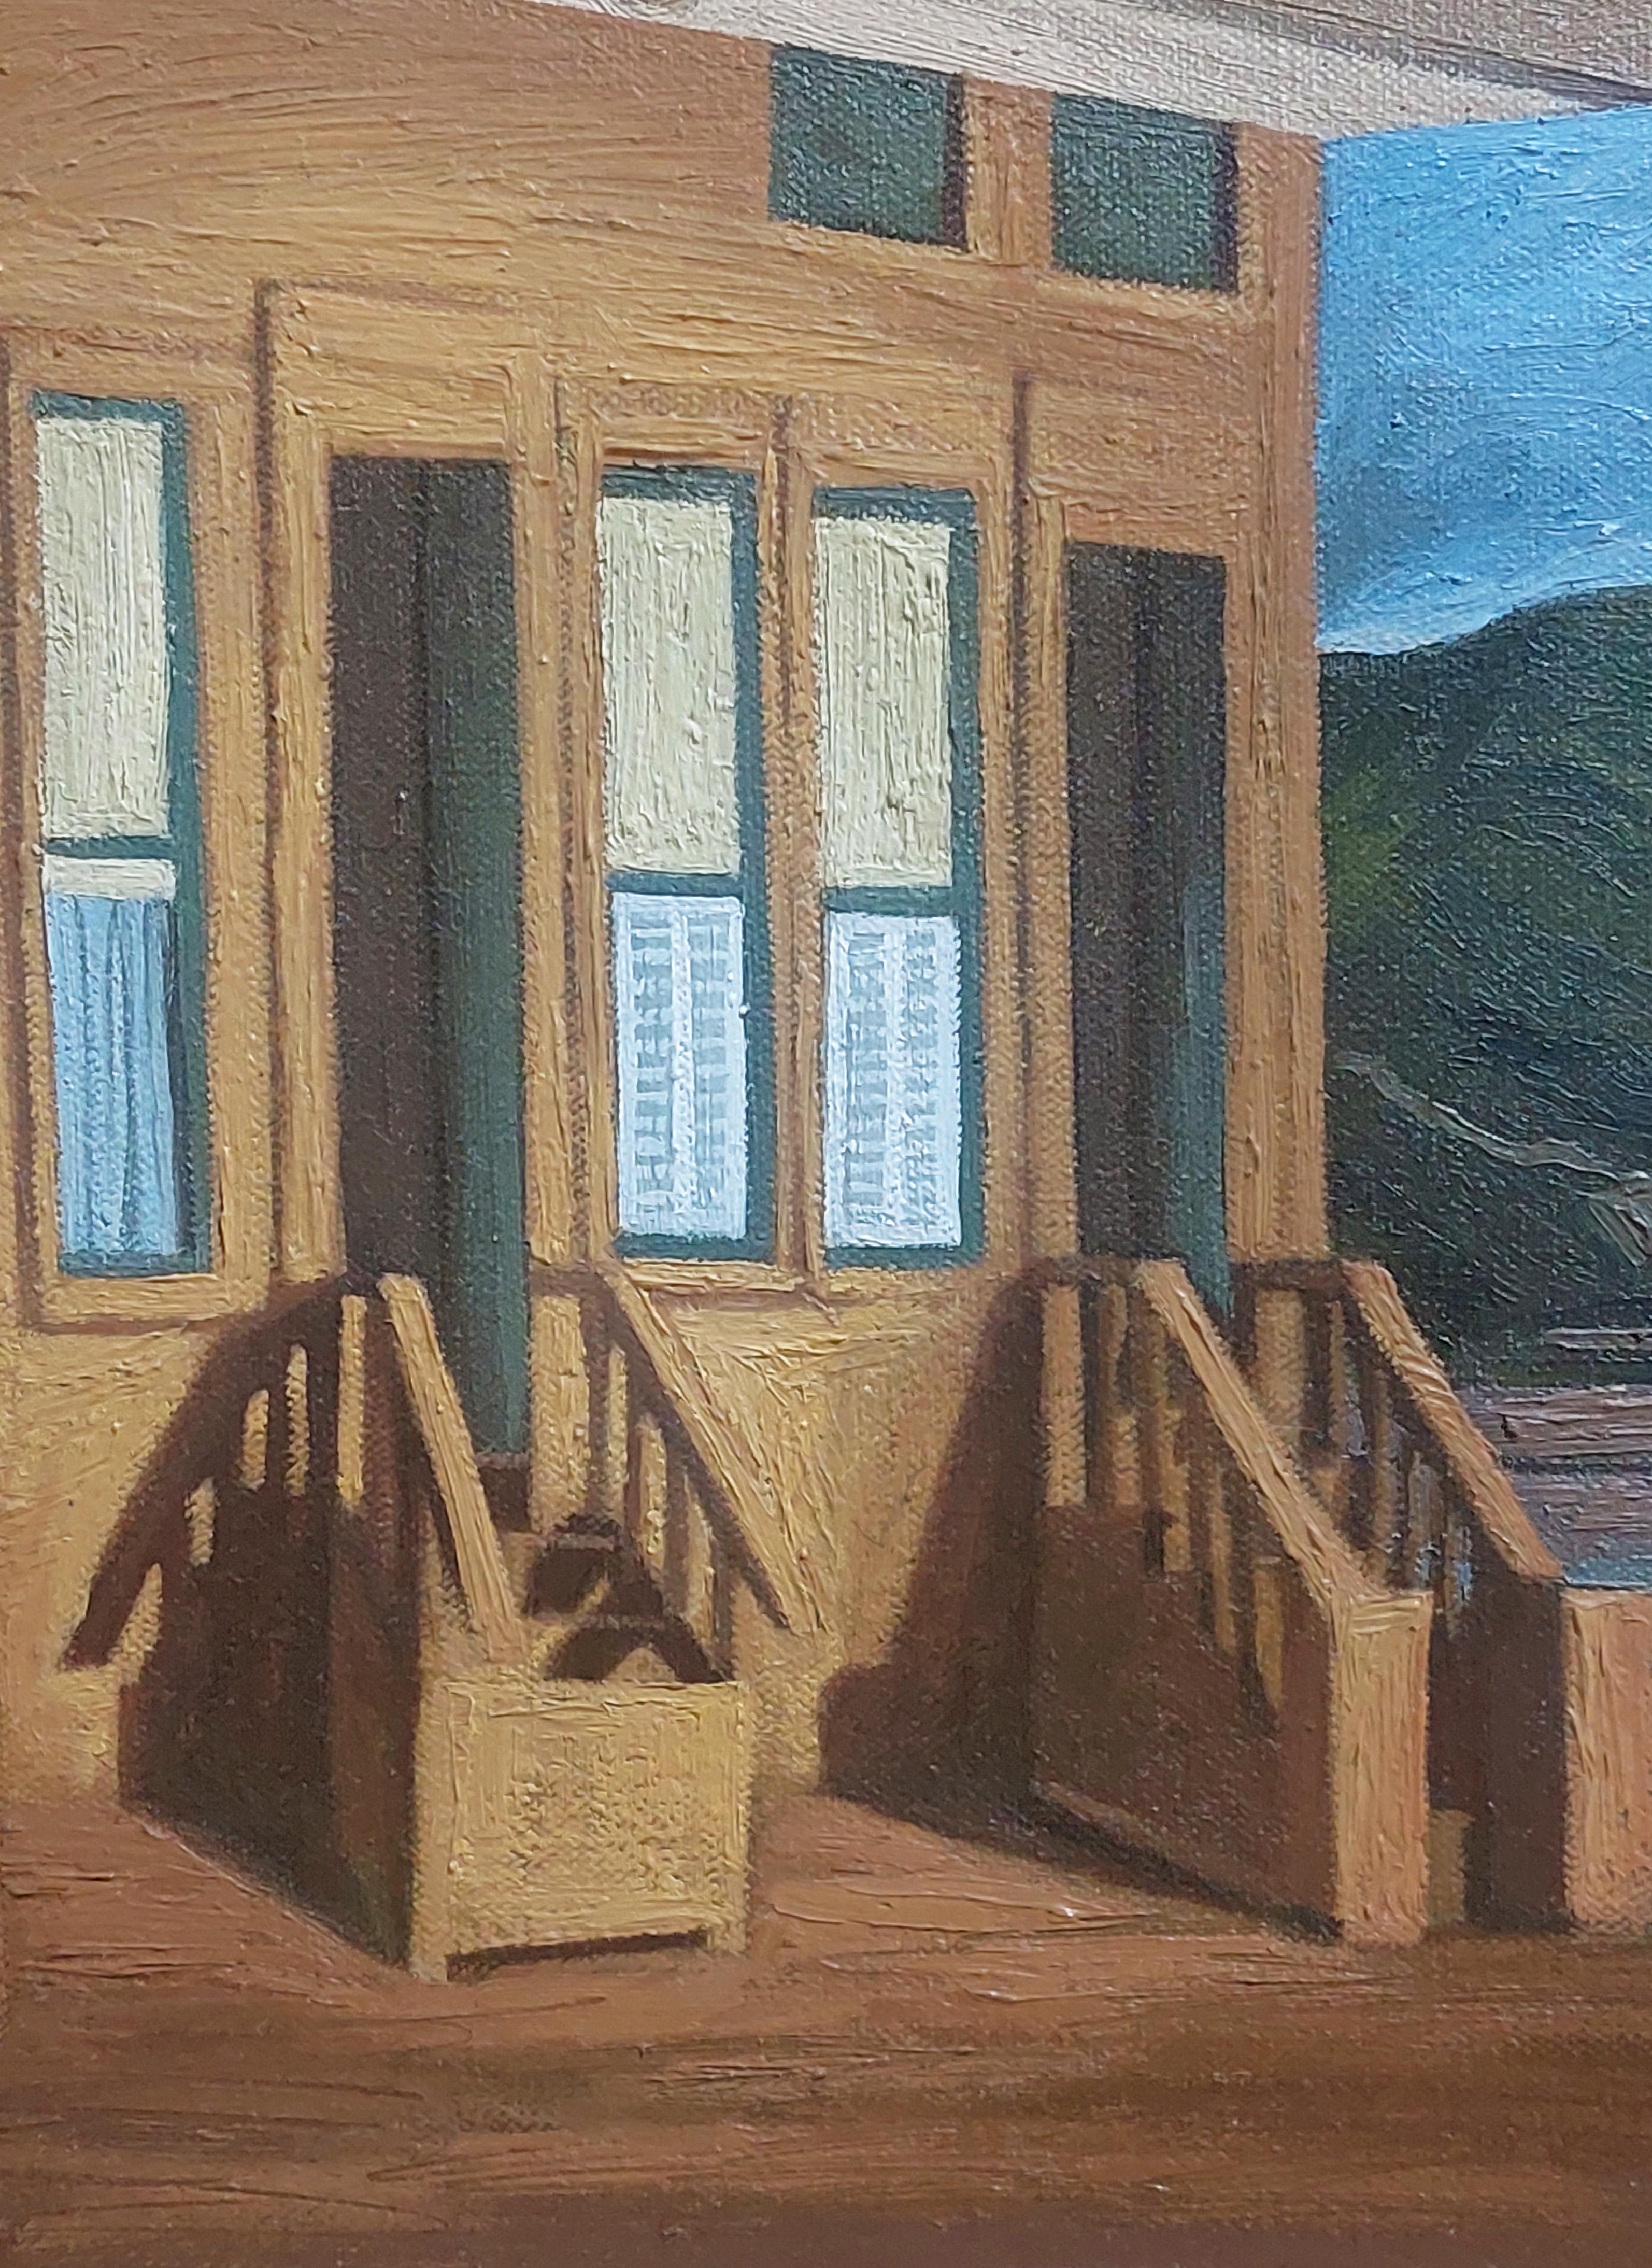 The Light 23, Interiors of a movie set Painting. Mounted on a stretcher  - Brown Still-Life Painting by Jose Ricardo Contreras Gonzalez